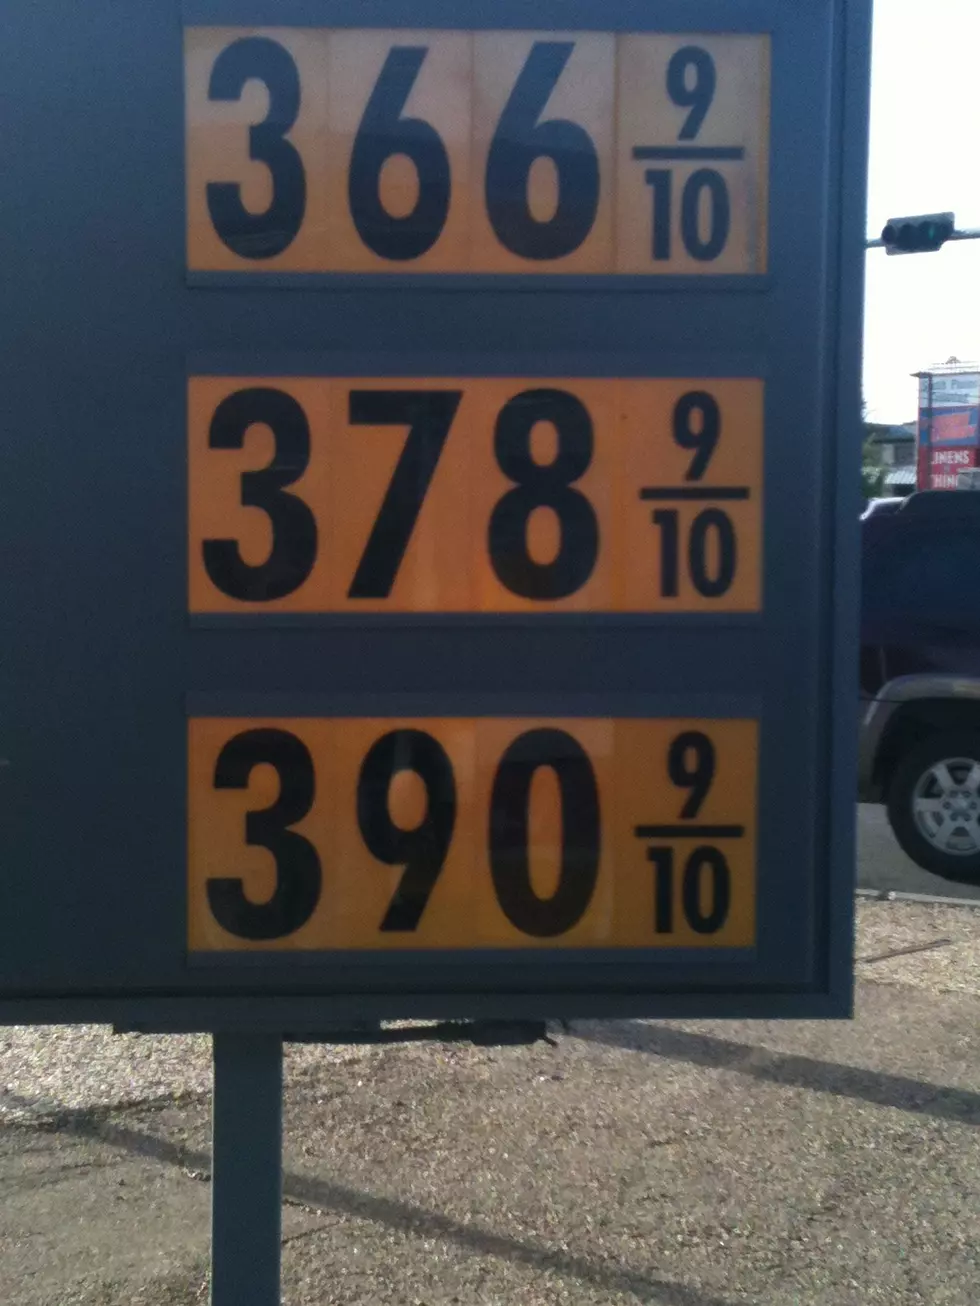 Lubbock Gas Prices Increase for Third Straight Week